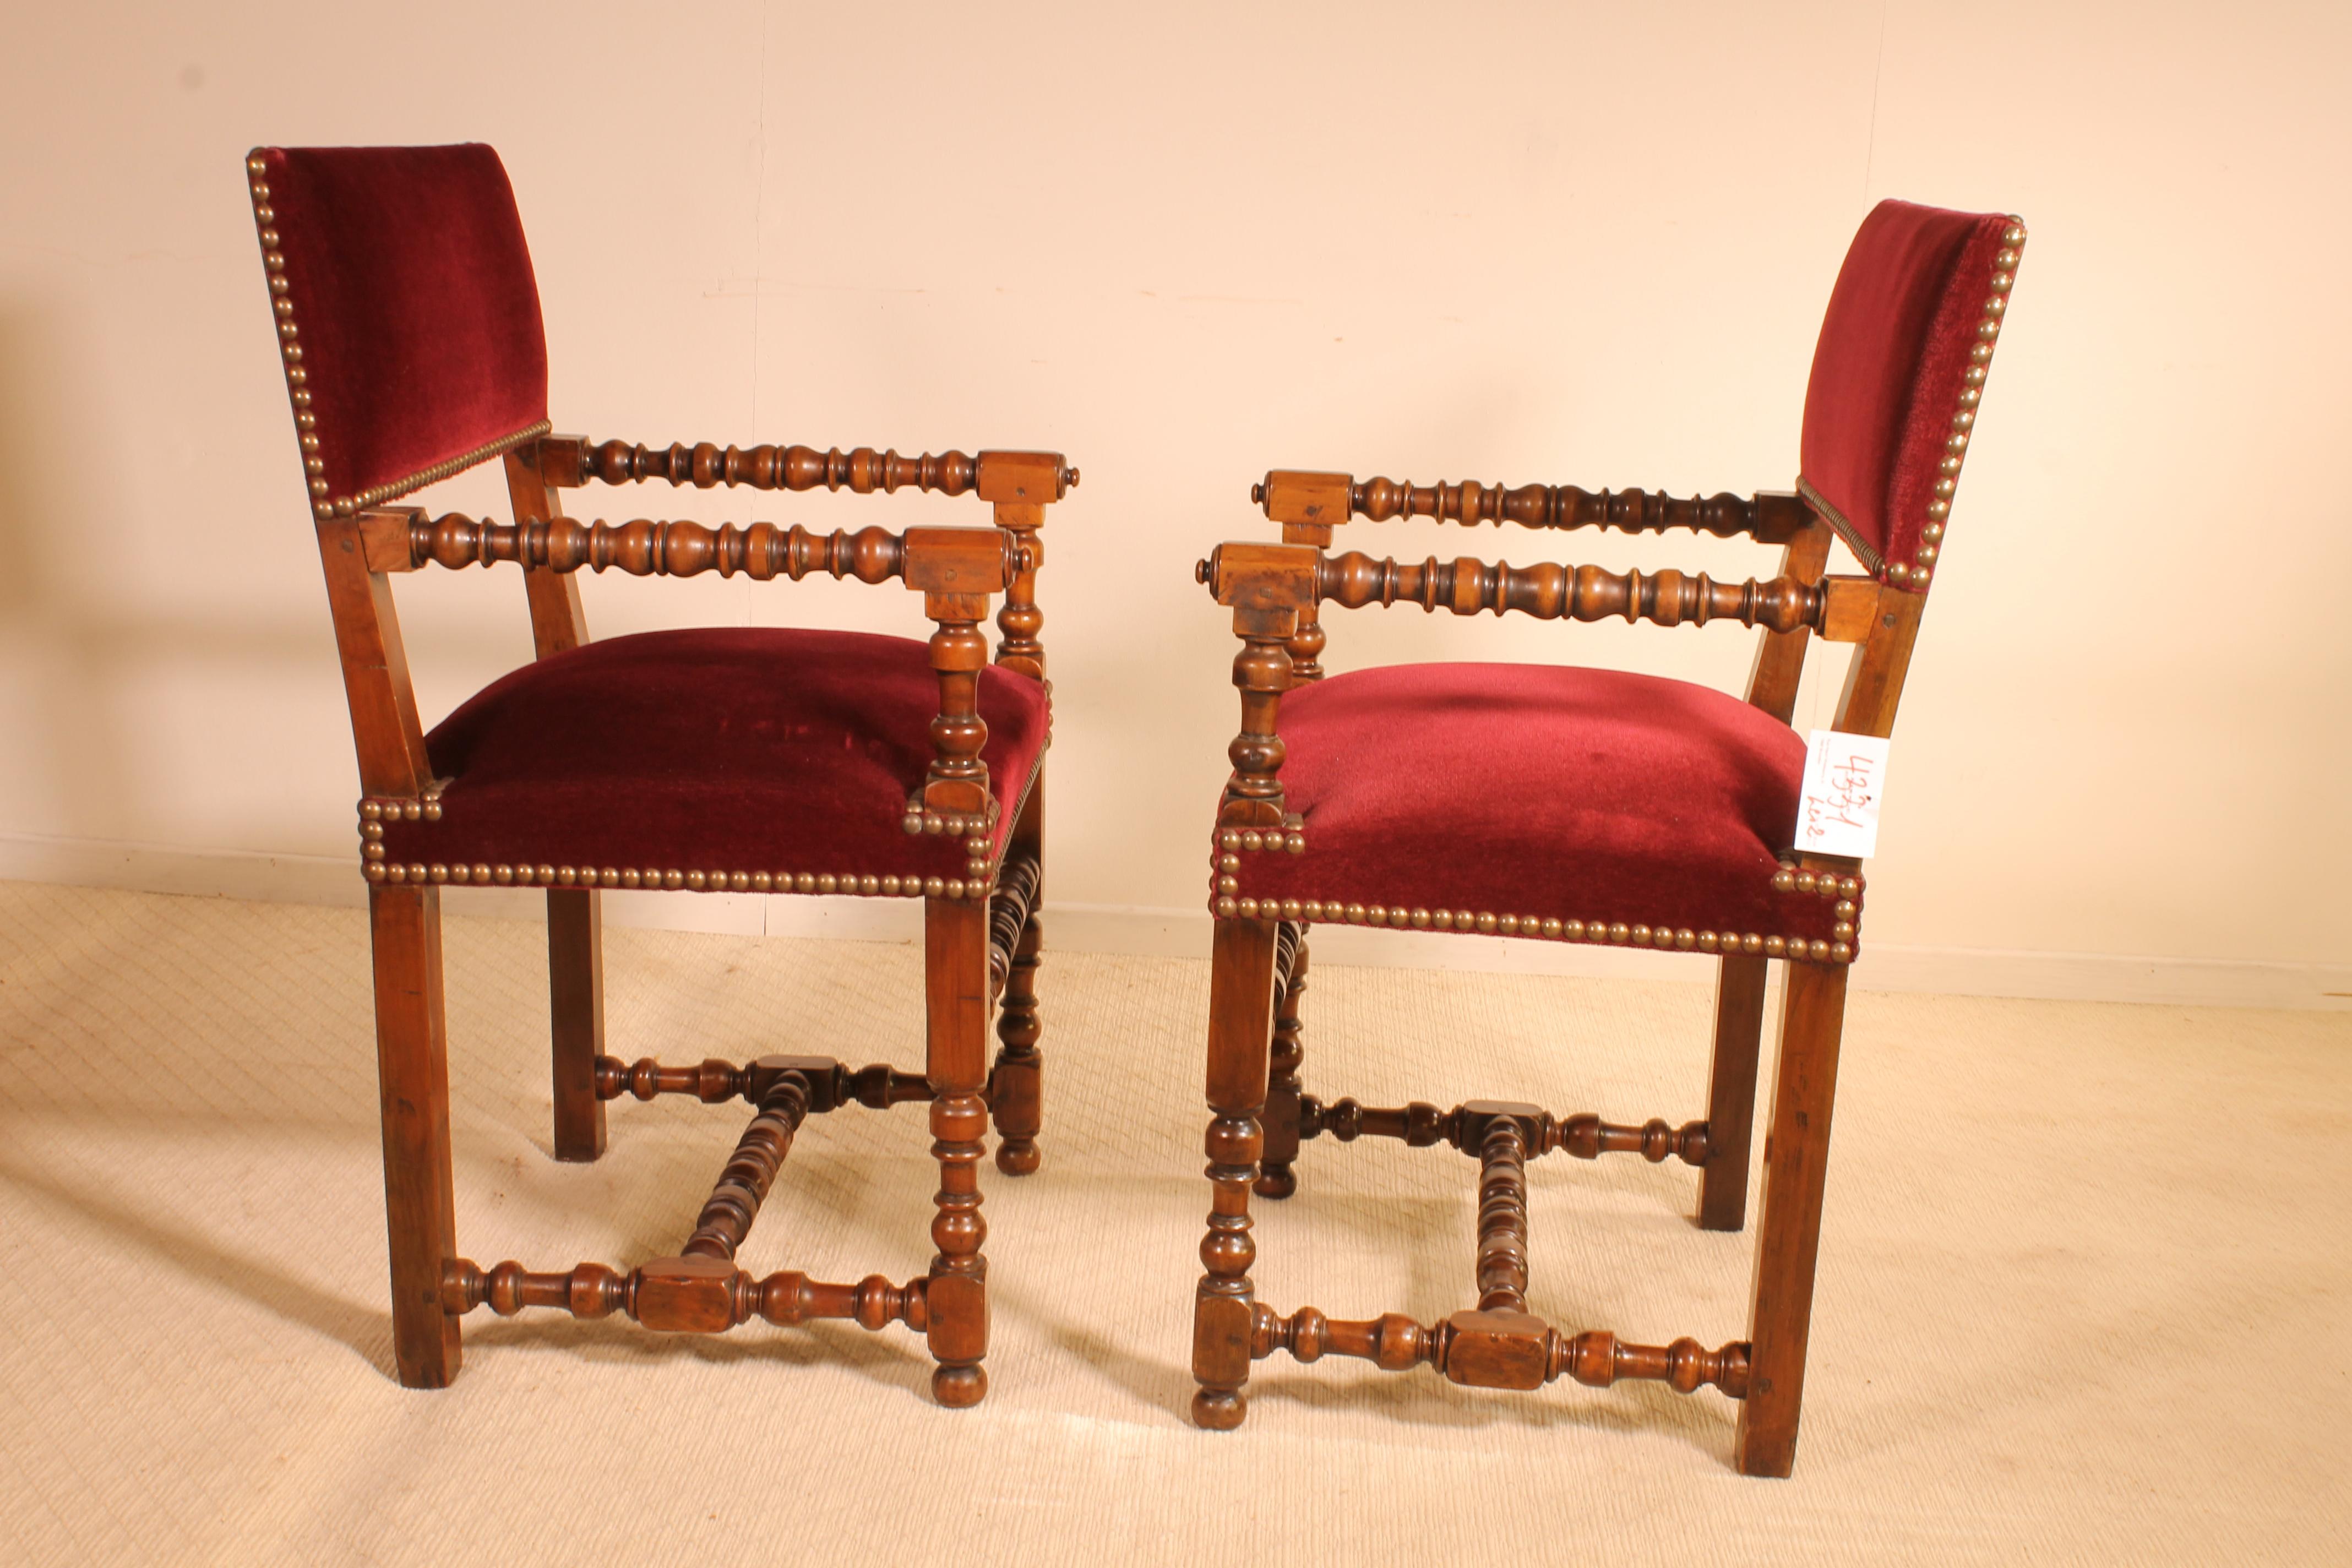 A fine pair of French armchairs in walnut Louis XIII style 19 century. 

This beautiful pair has elegant turned arms and legs and a H-form base. 

This fin pair was re-upholstered with a Beautiful red velvet 
In overall good condition and